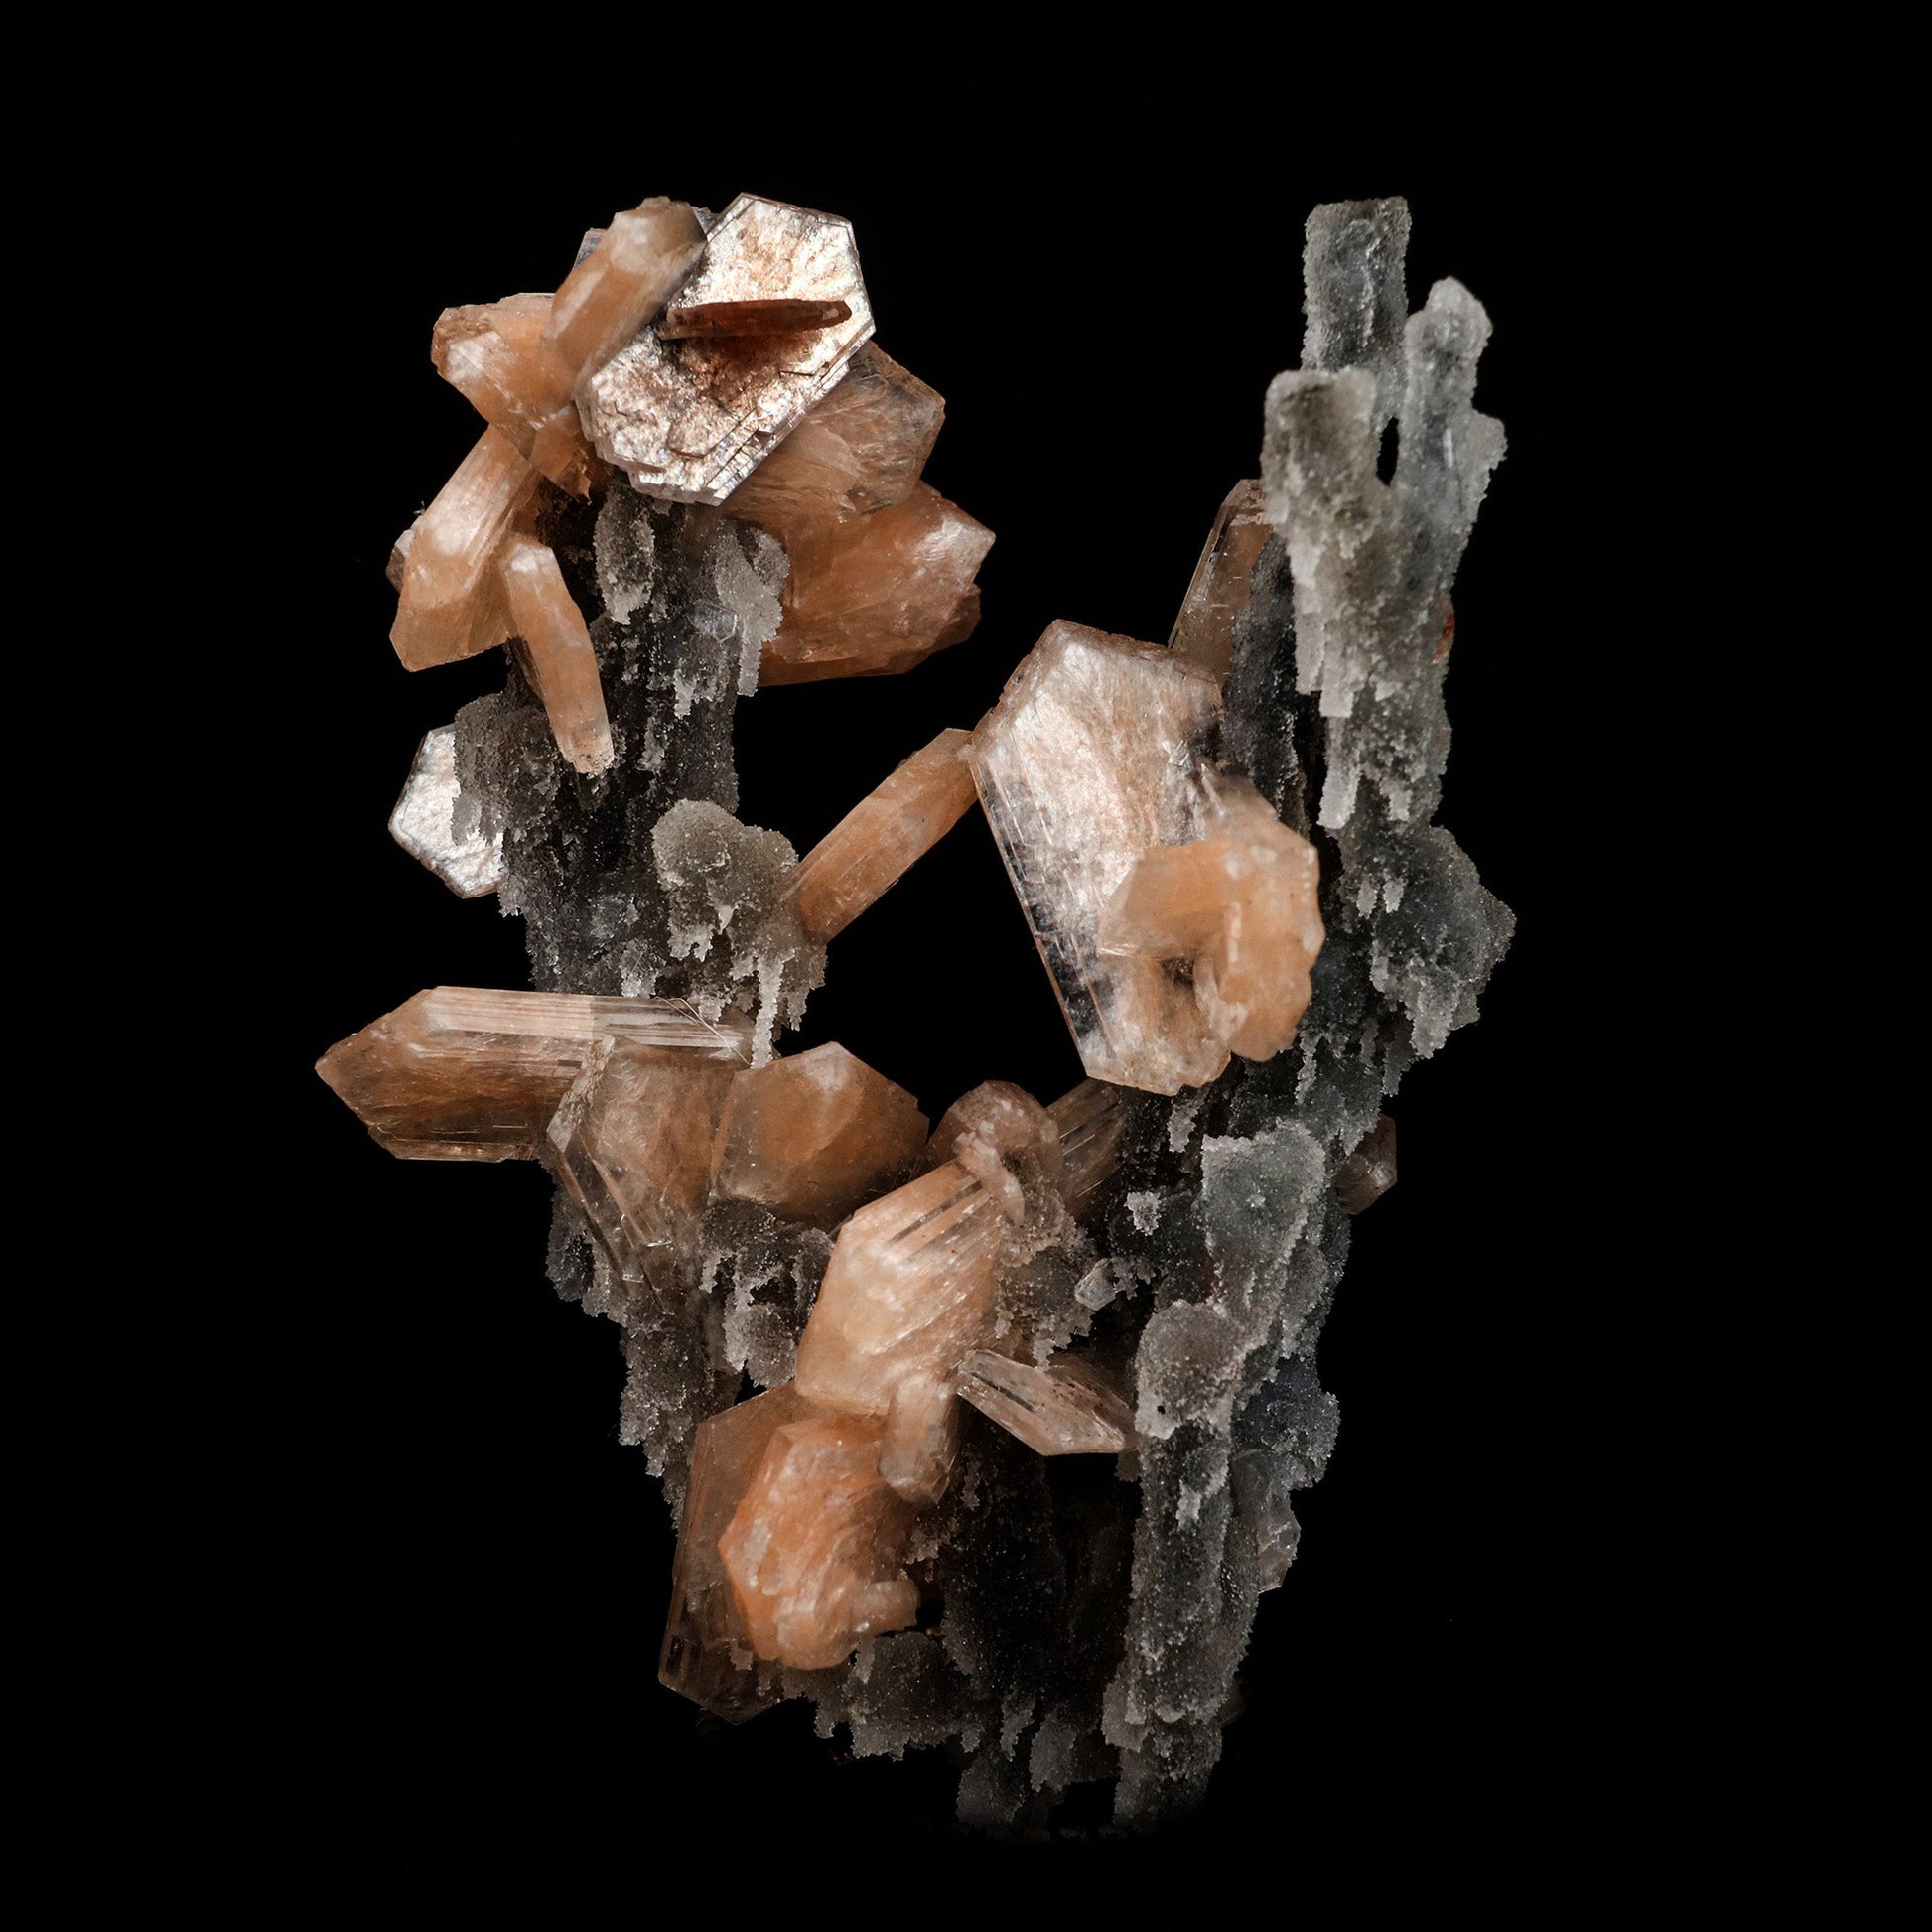 Stilbite on Chalcedony Coral Formation Natural Mineral Specimen # B 5…  https://www.superbminerals.us/products/stilbite-on-chalcedony-coral-formation-natural-mineral-specimen-b-5145  Features: Elegant and delicate, this is a quintessential example of the great combination pieces from the trap rocks of India. The Chalcedony beautifully coats the winding, narrow stalactites that were already there. The Chalcedony continued to grow, adding these delicate structures that range from straw-like fingers